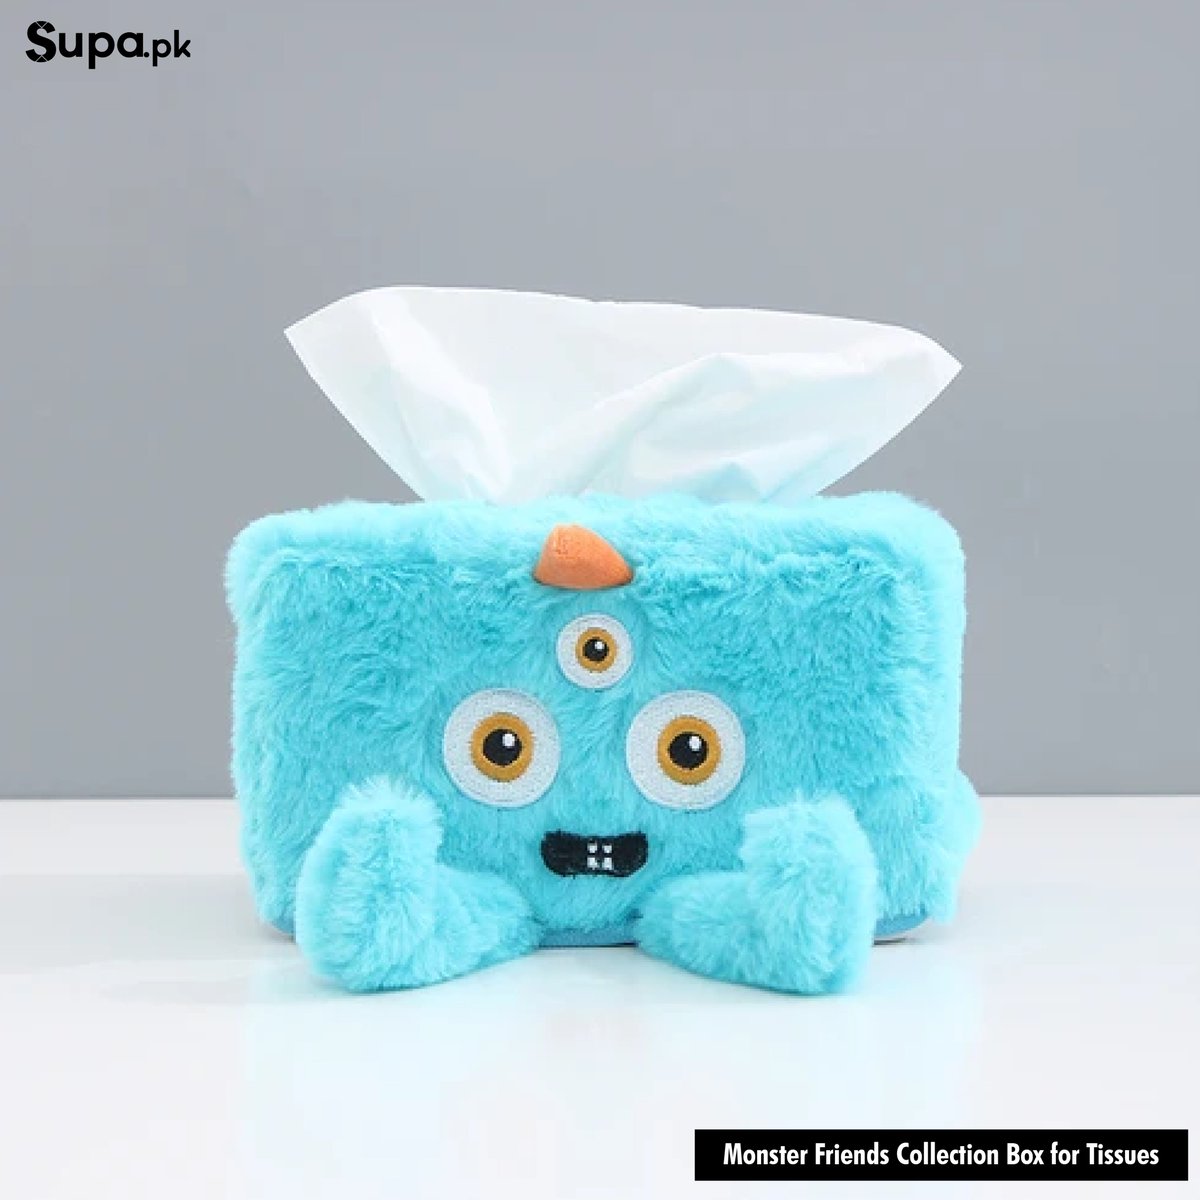 'The Brightly Coloured Monster Image And The Comfortable Material Make The Tissue Box A Beautiful Home Décor.'

Order Now: bit.ly/3f1tbjt

#tissuebox #tempattissue #tempattisu #kotaktissue 
#onlineshop #superiorshopping #onlineshopping #supa #supapk